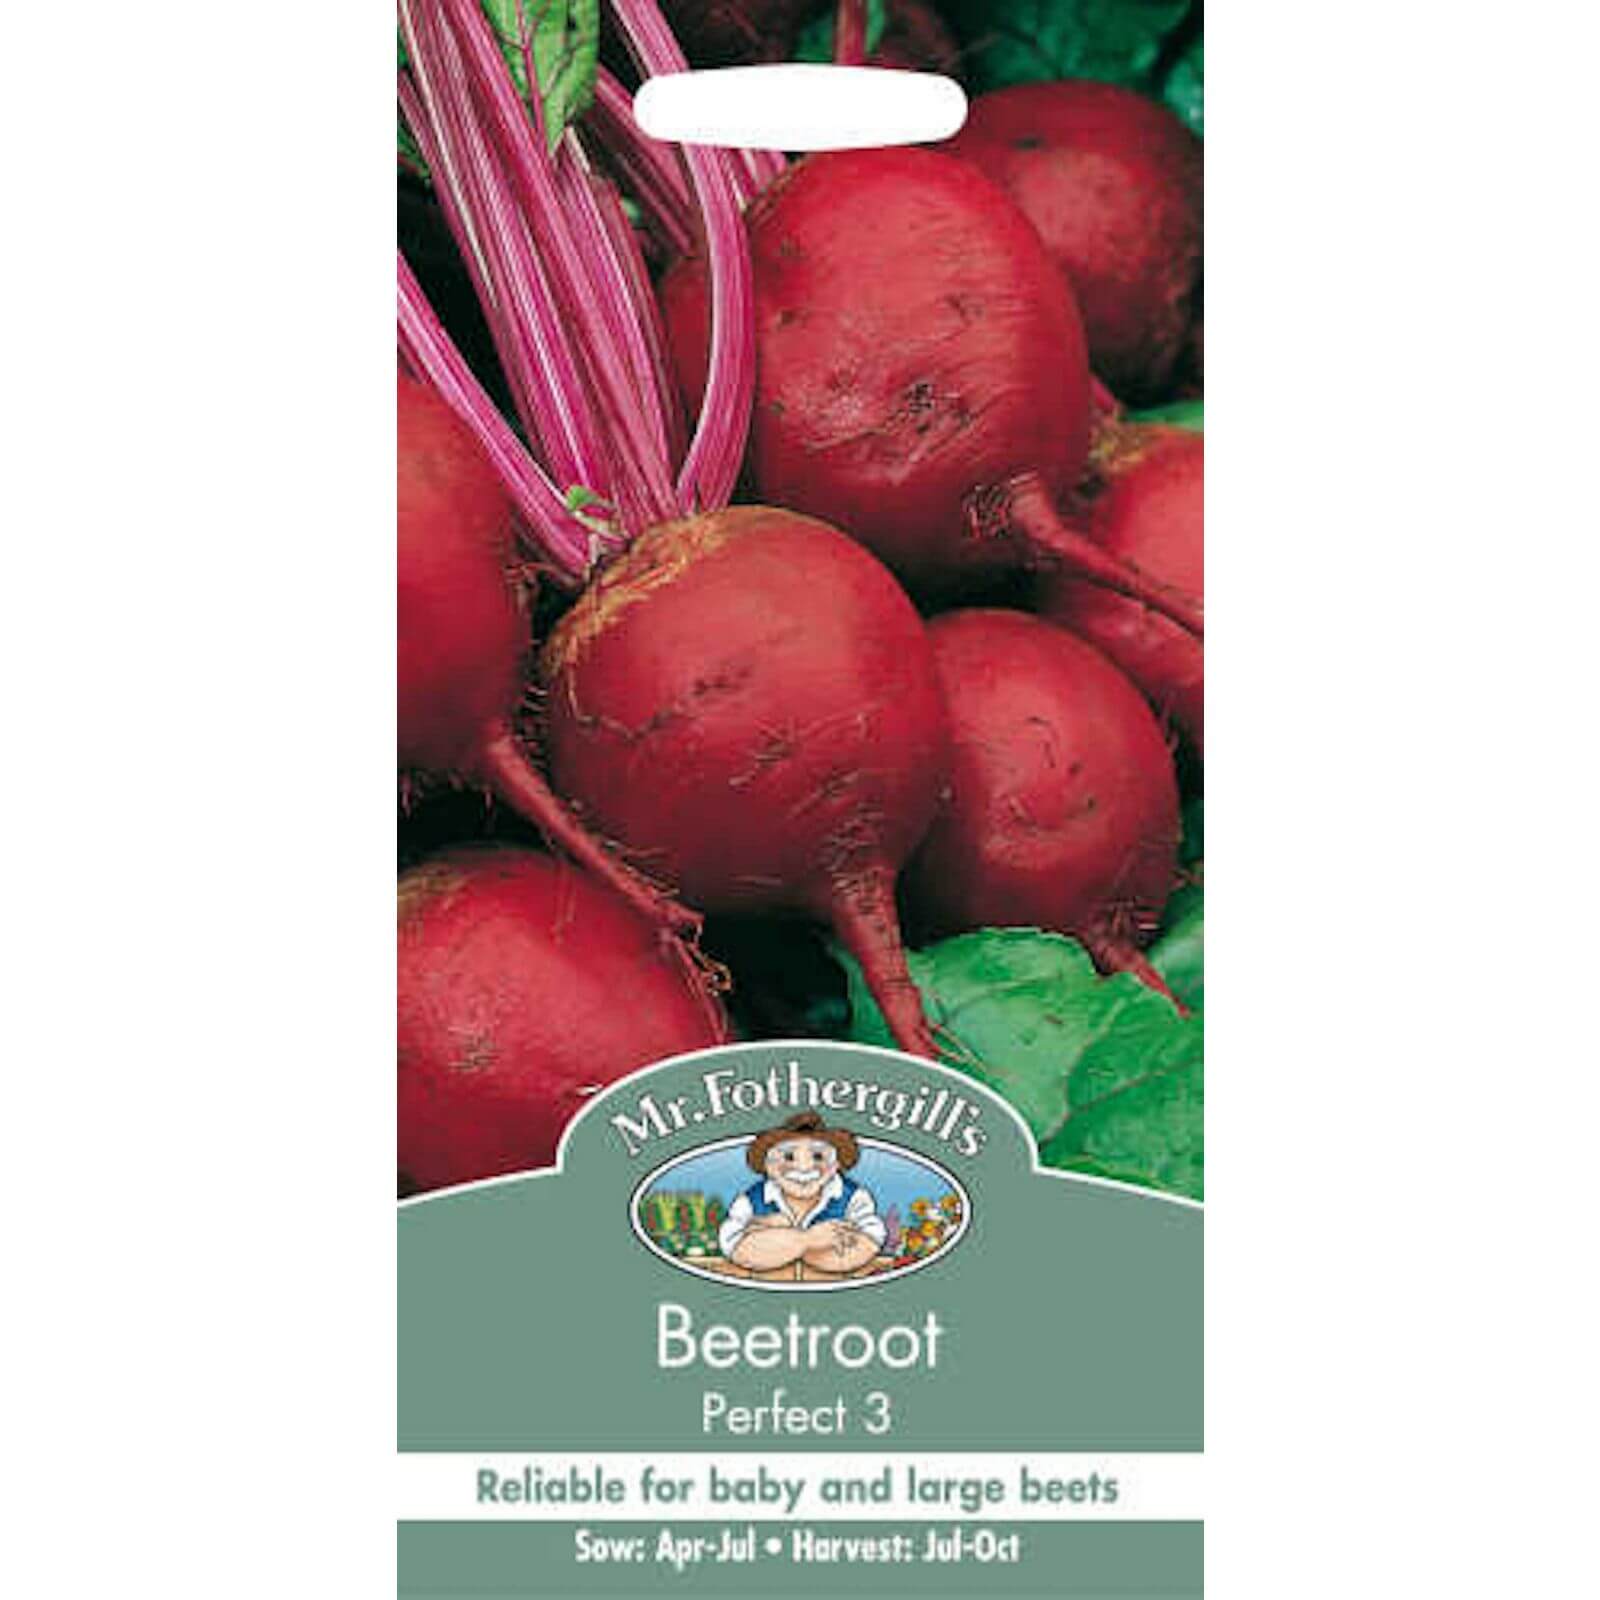 Mr. Fothergill's Beetroot Perfect 3 Seeds